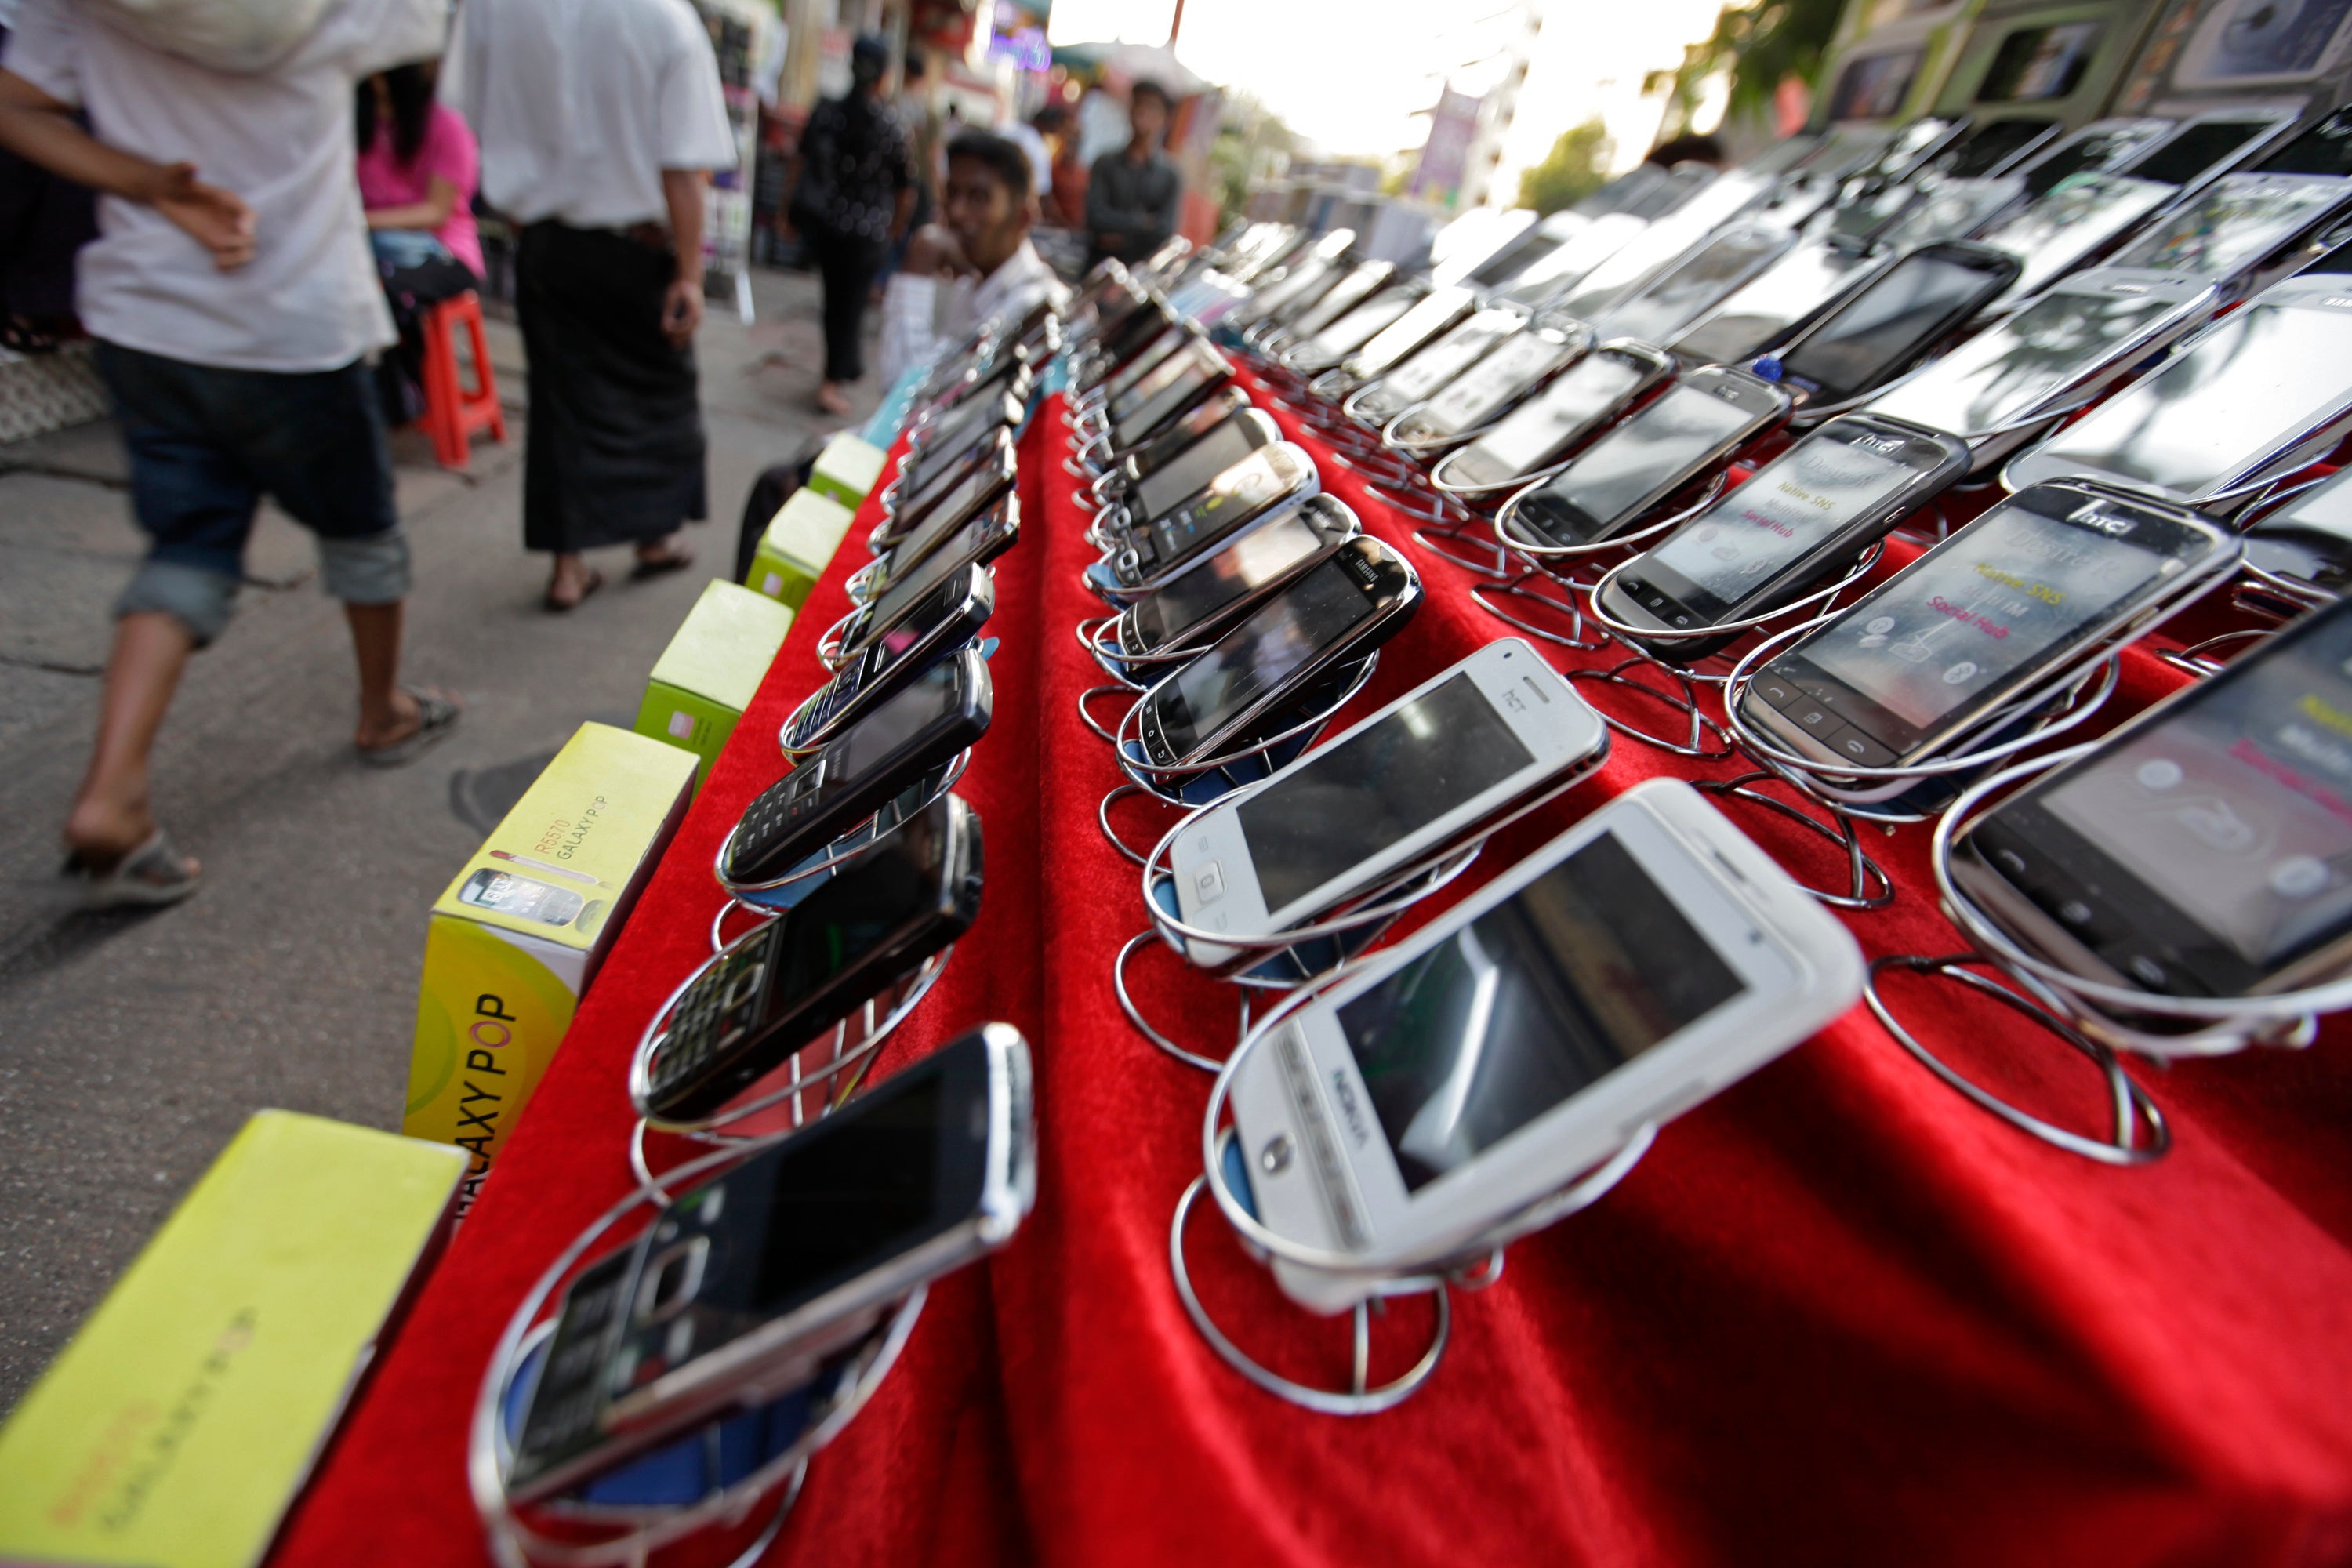 Smartphones could be linked together to create a network of earthquake detectors.